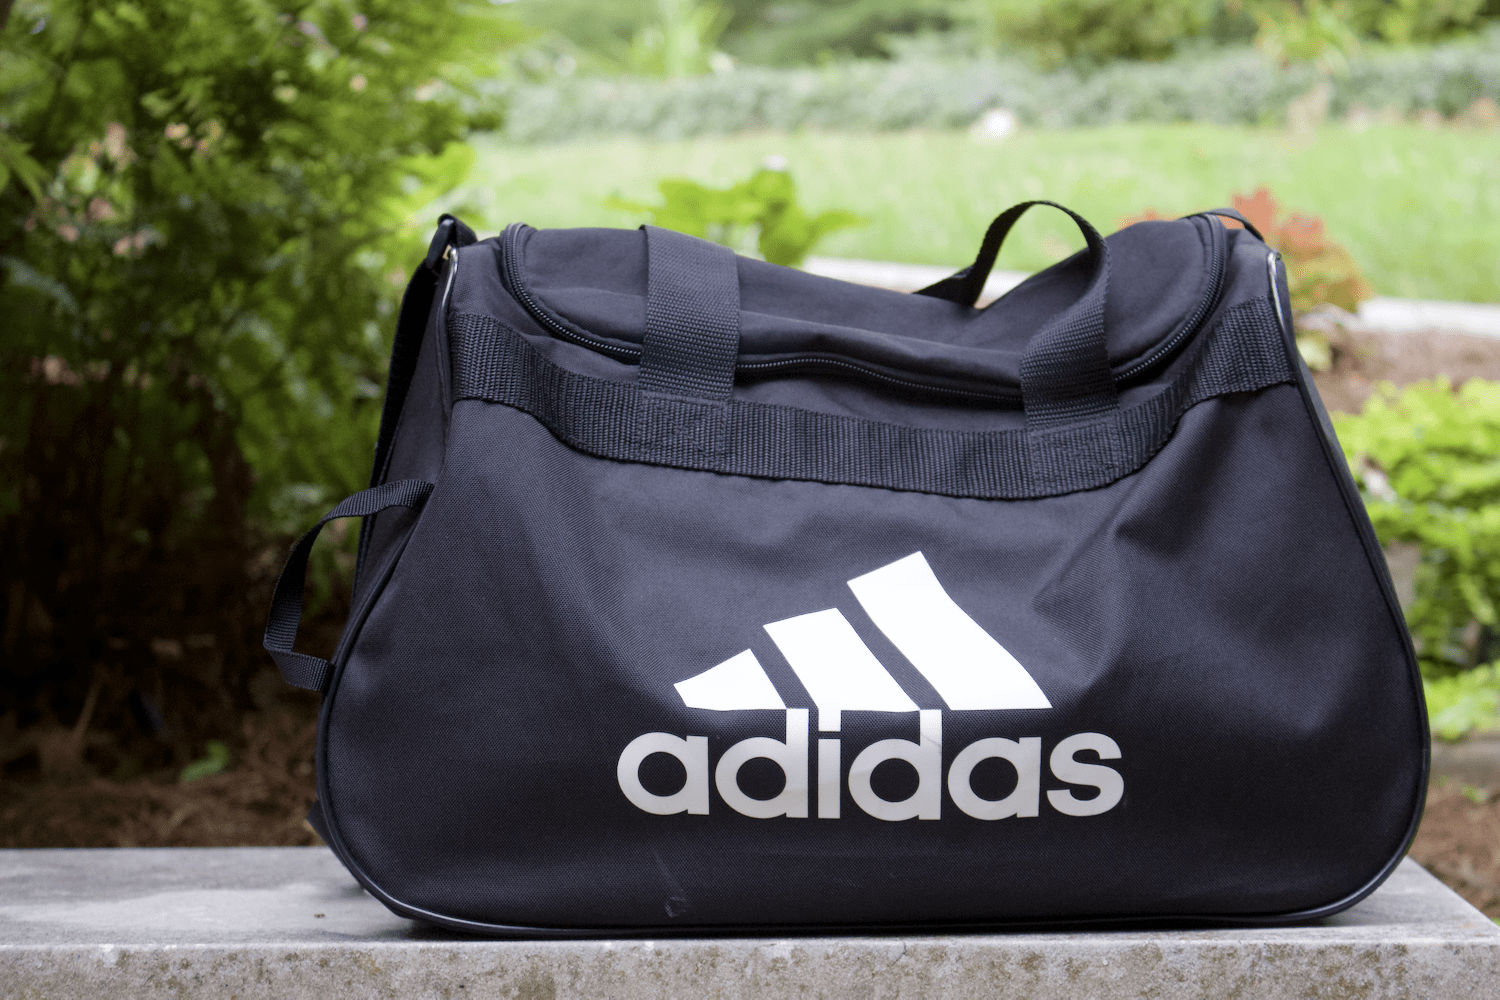 Gym Bag Essentials | Get the most out of your workout by having everything you need in your gym bag. Here's what I keep in my gym bag to have the best workouts!